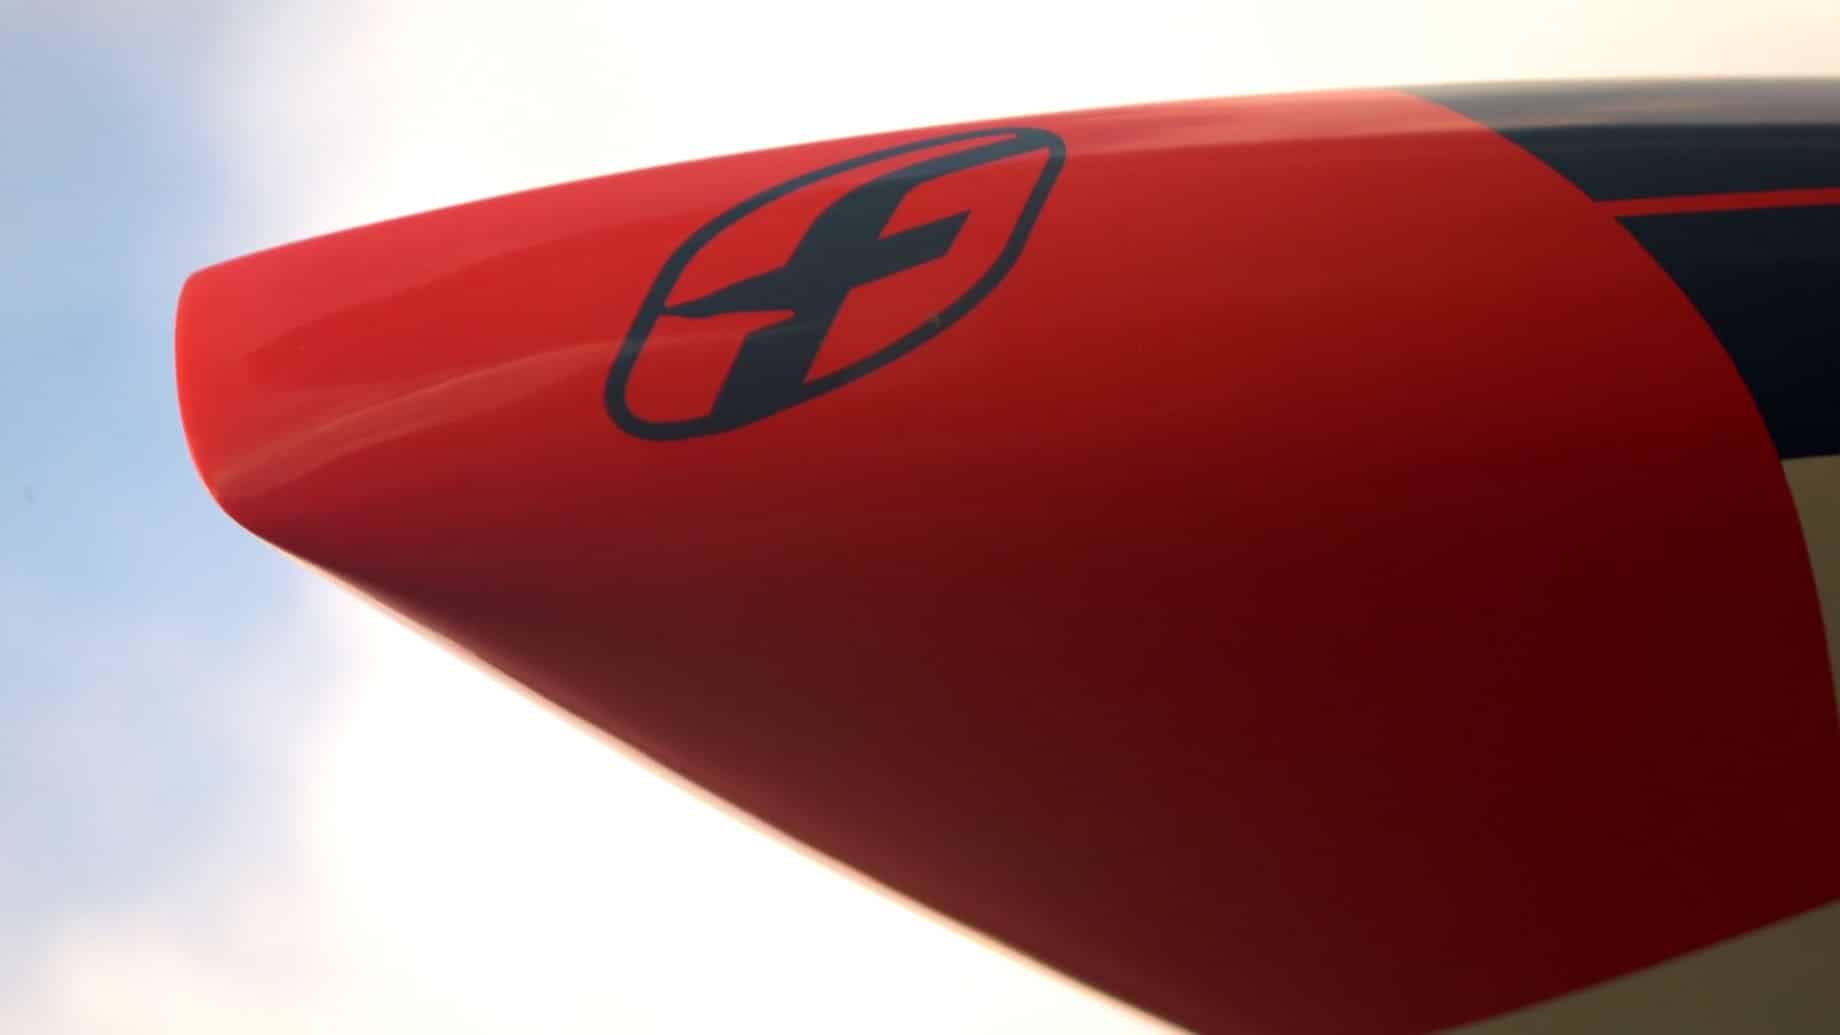 Nouvelle gamme touring de stand up paddle F-One